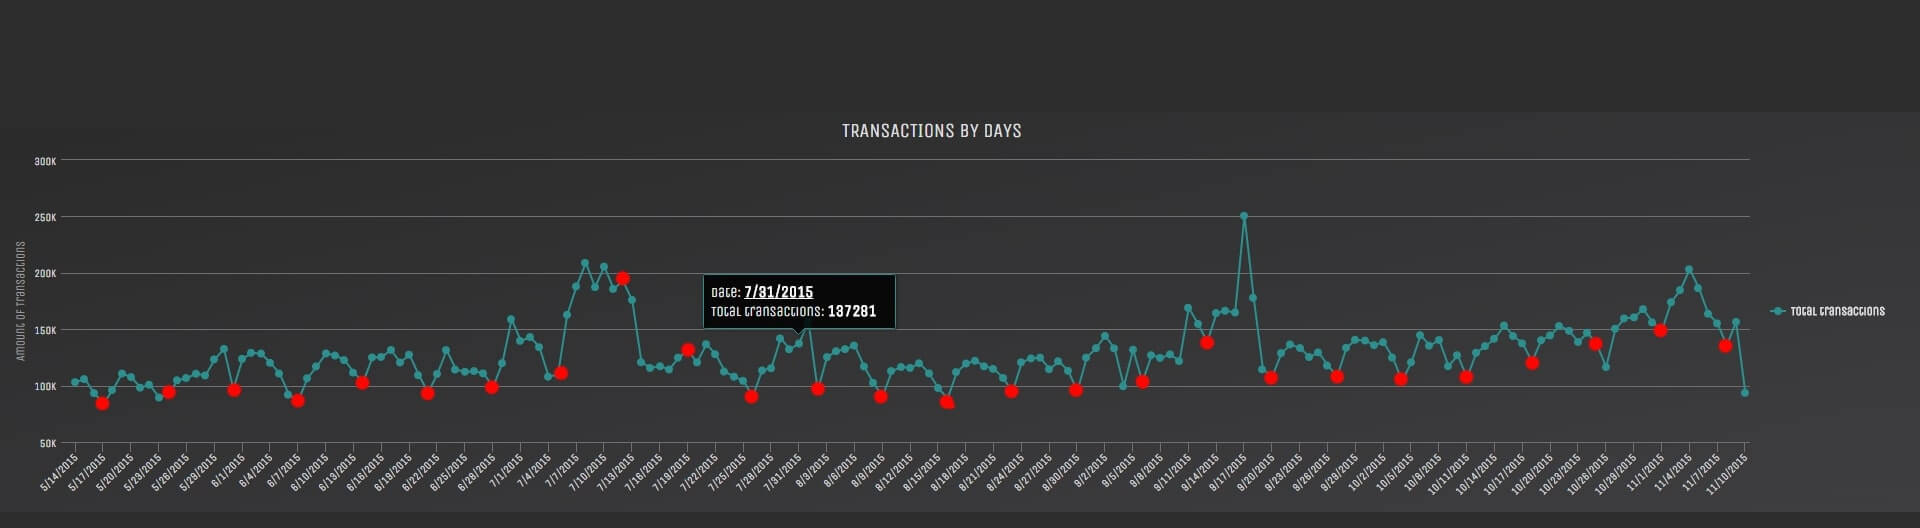 Blockchain transactions split by days over the period of the last 180 days